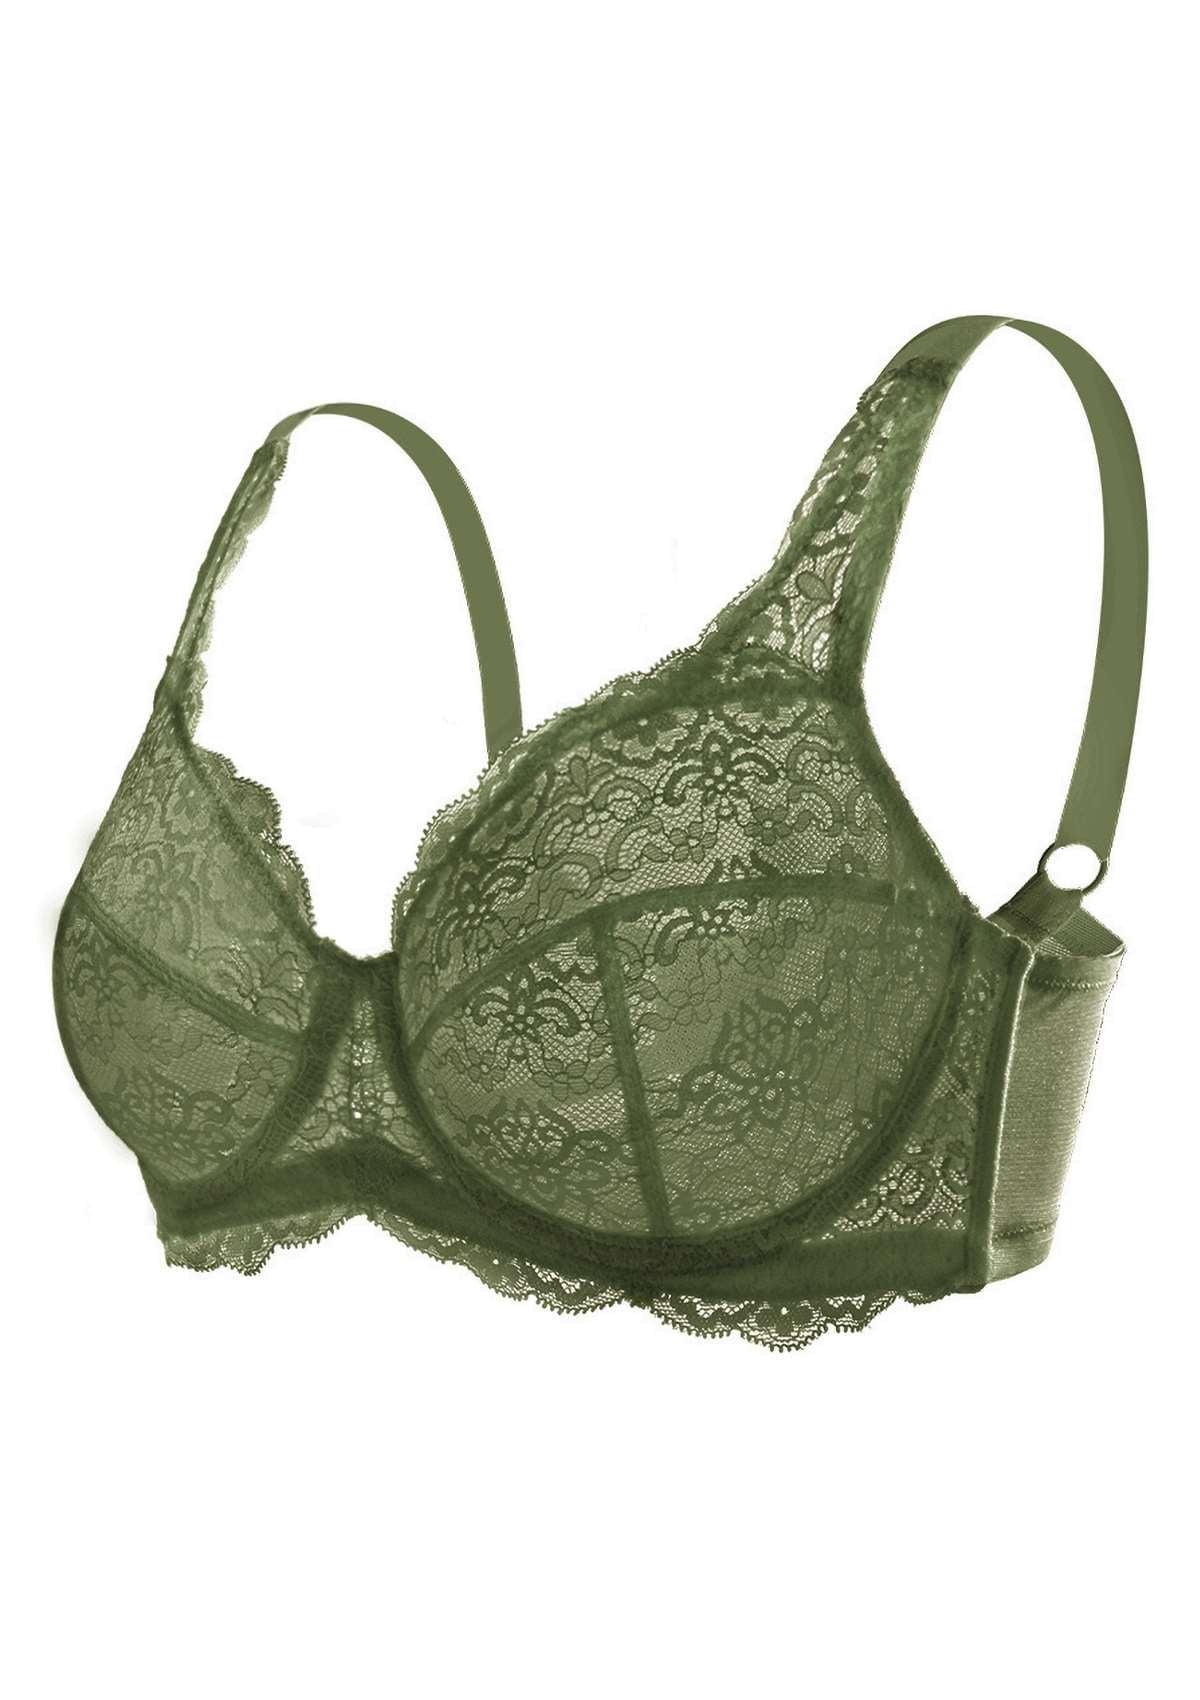 HSIA All-Over Floral Lace Unlined Bra: Minimizer Bra For Heavy Breasts - Dark Green / 38 / C